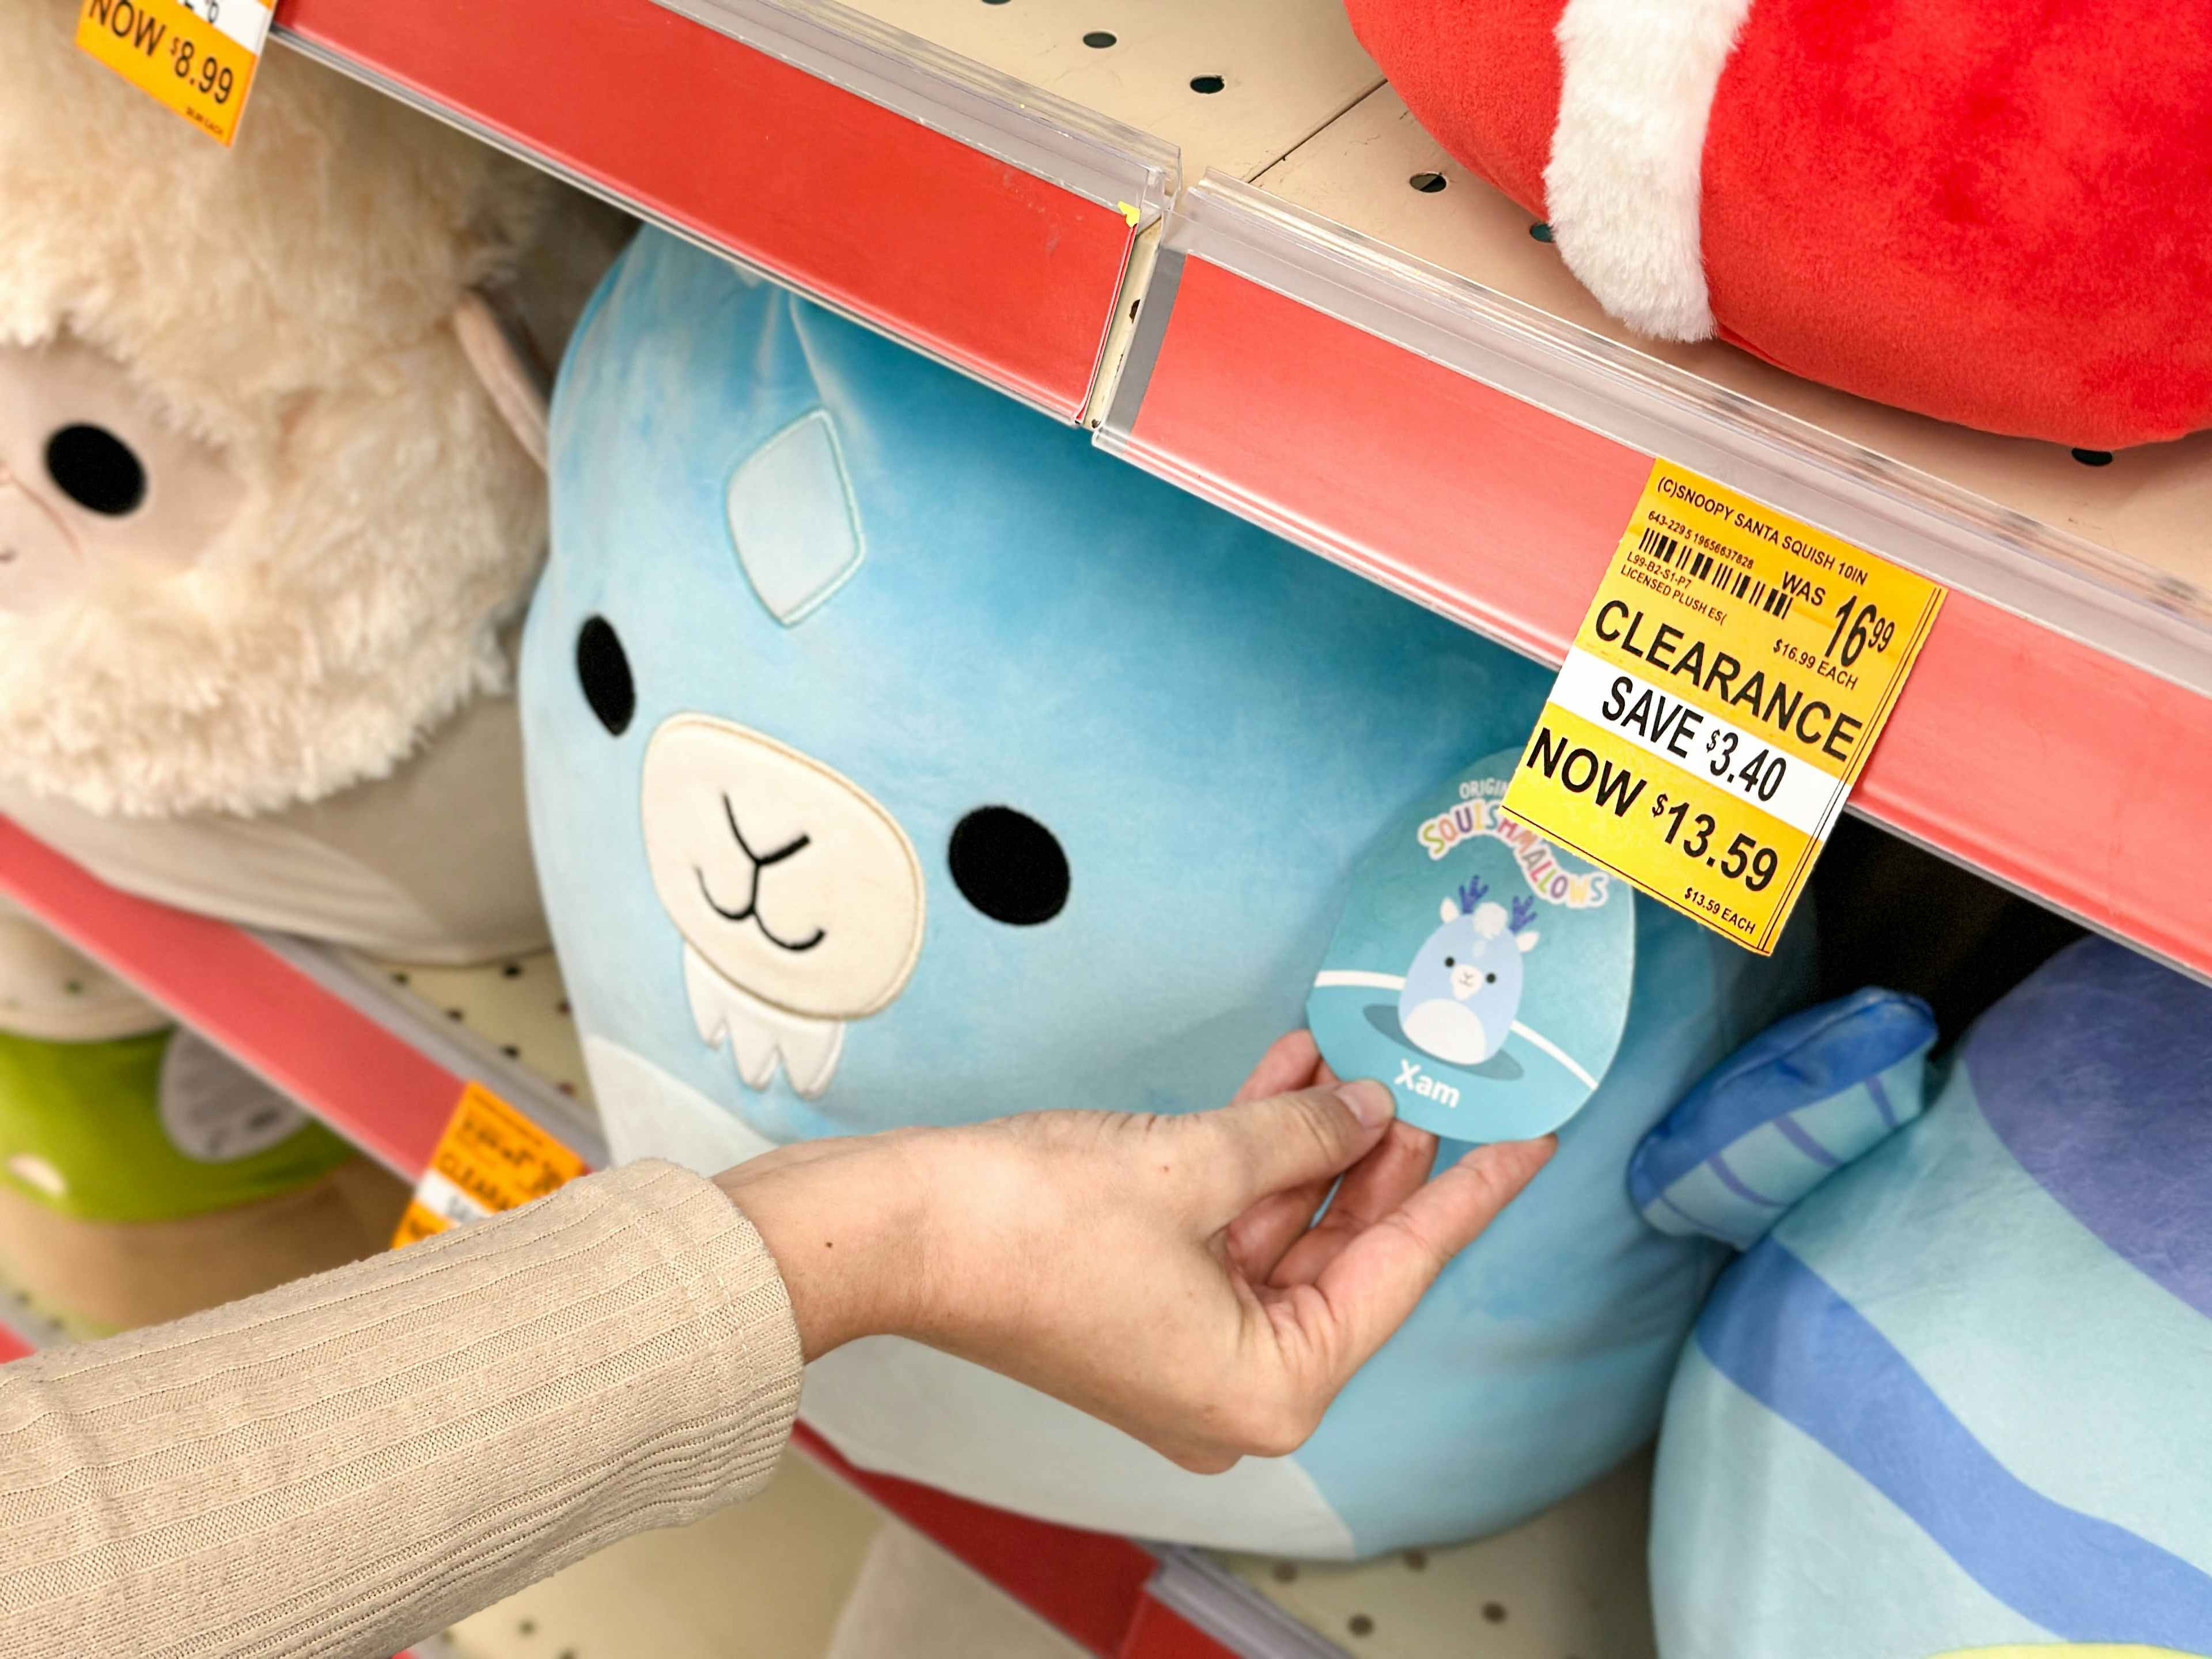 walgreens-squishmallow-clearance-sale-kcl-model-8